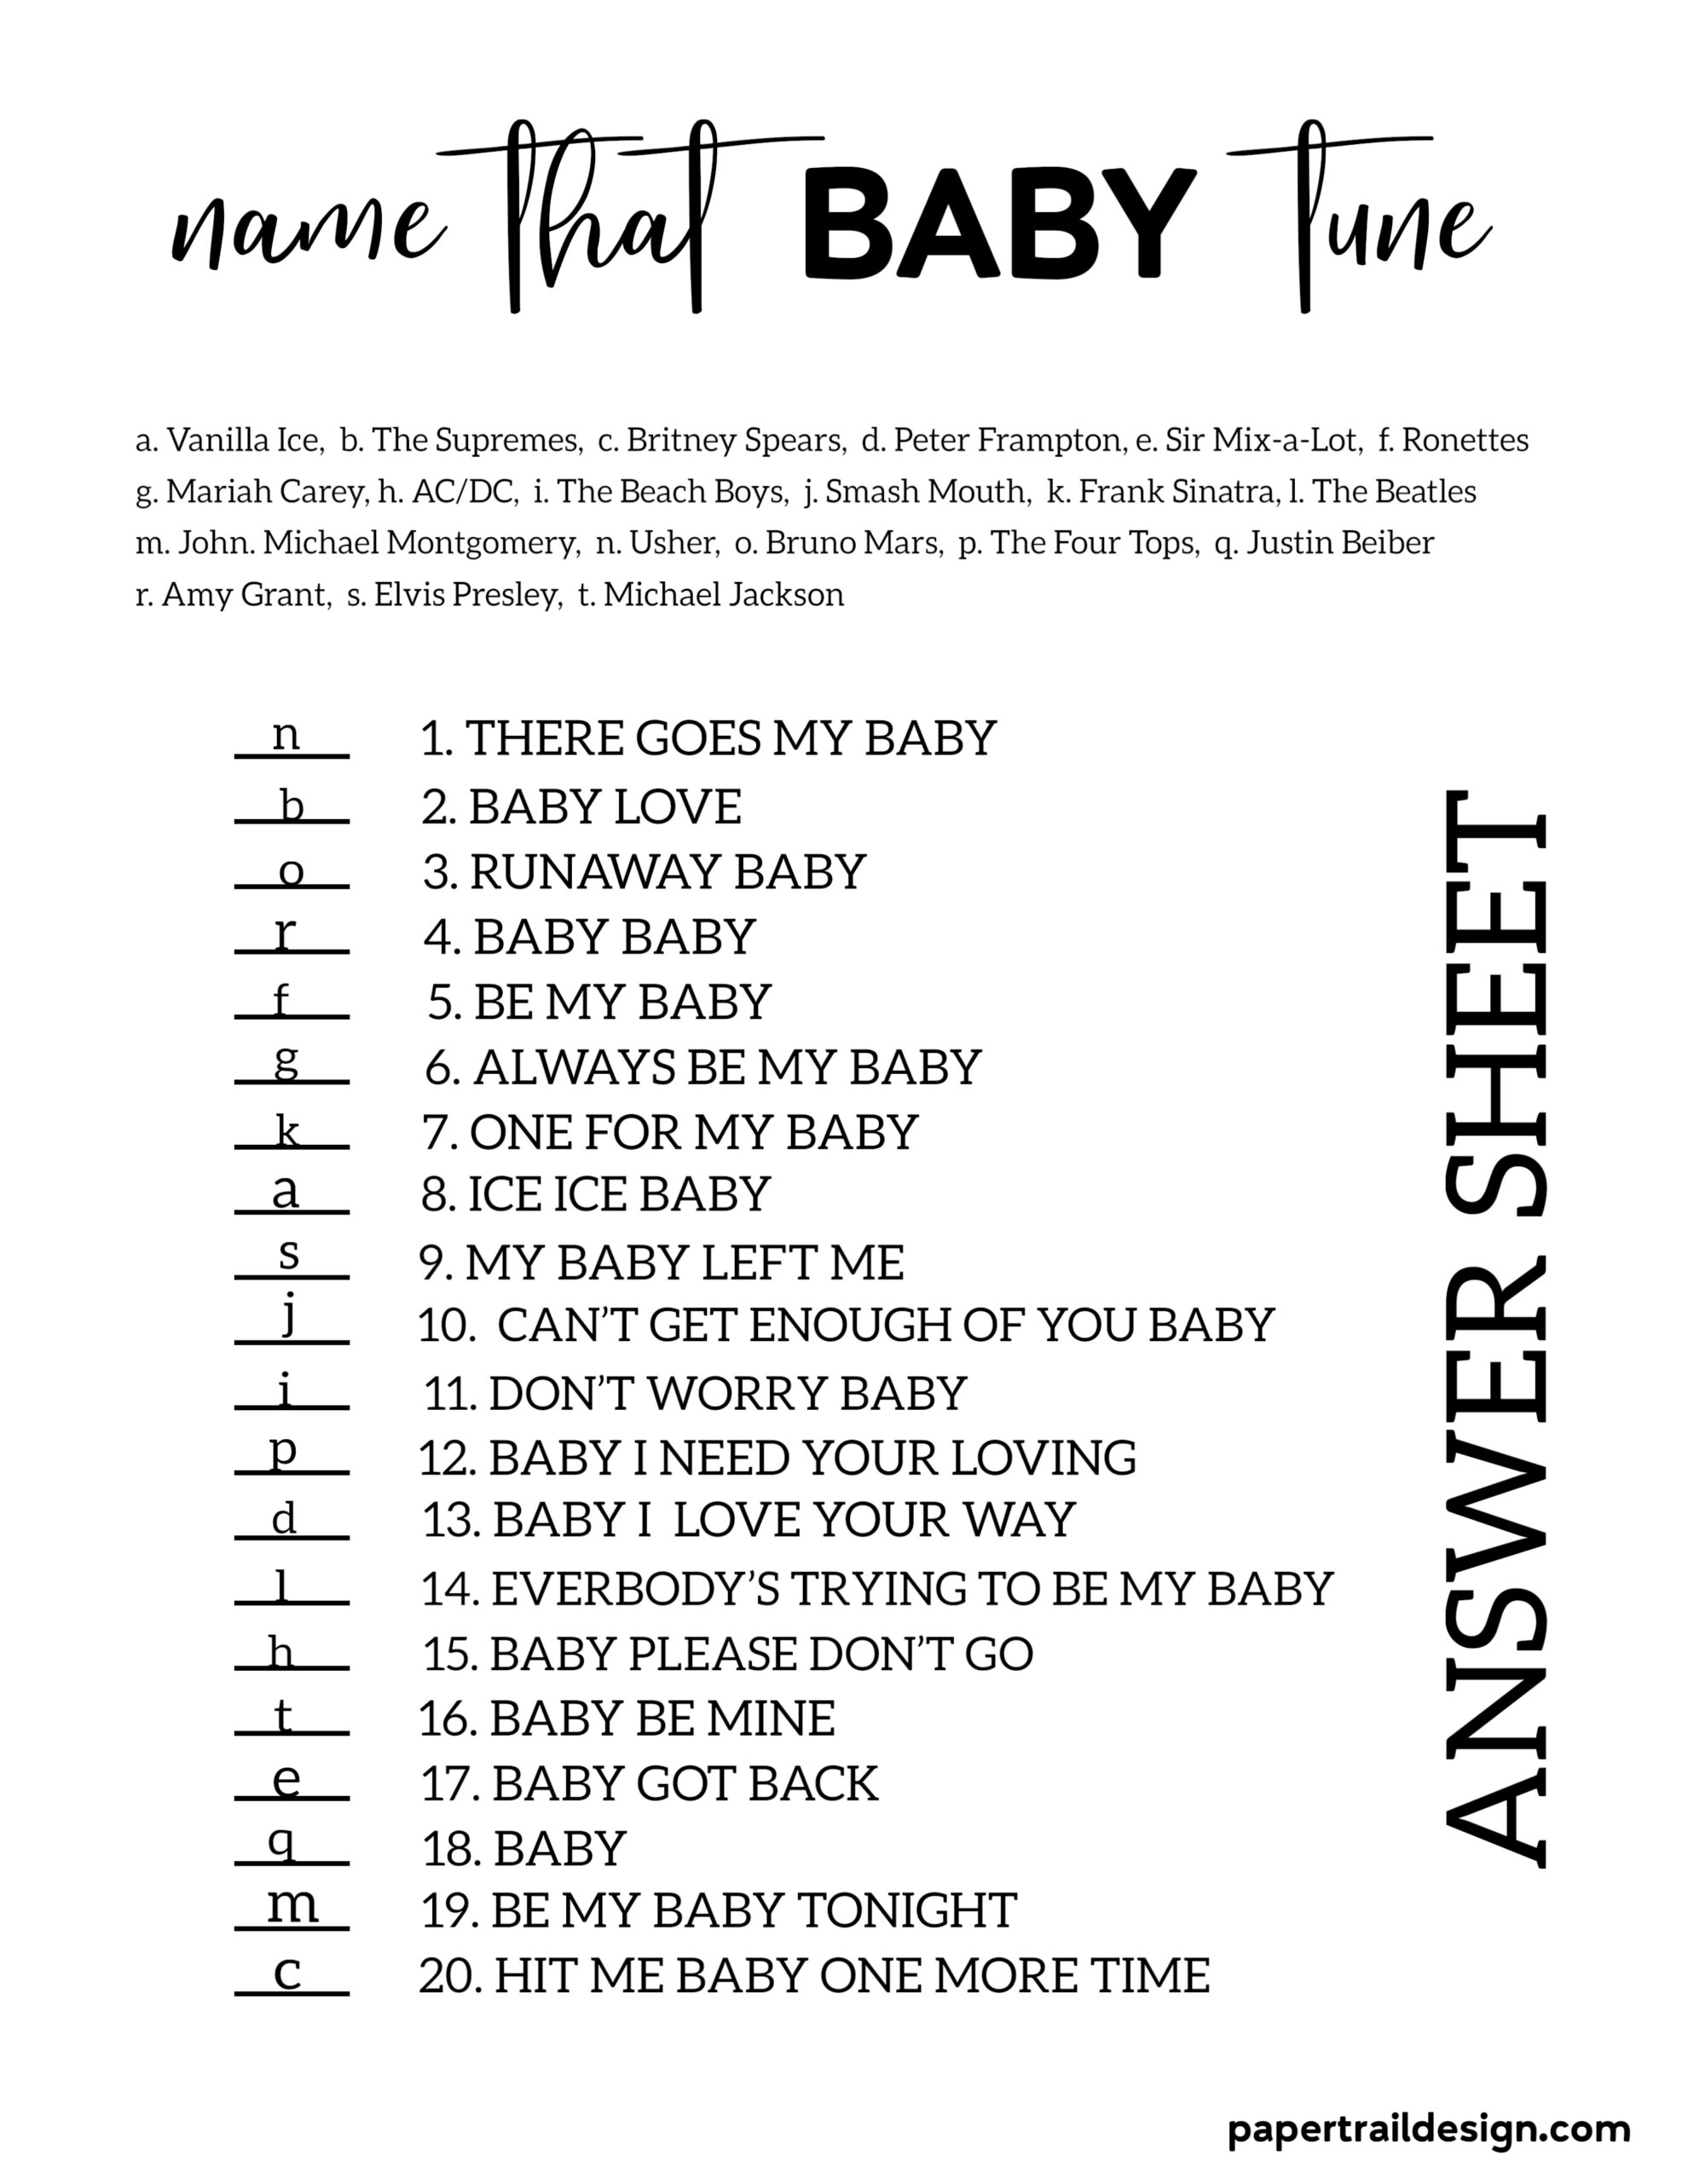 party-supplies-baby-shower-sg1-silver-glitter-baby-games-fun-baby-song